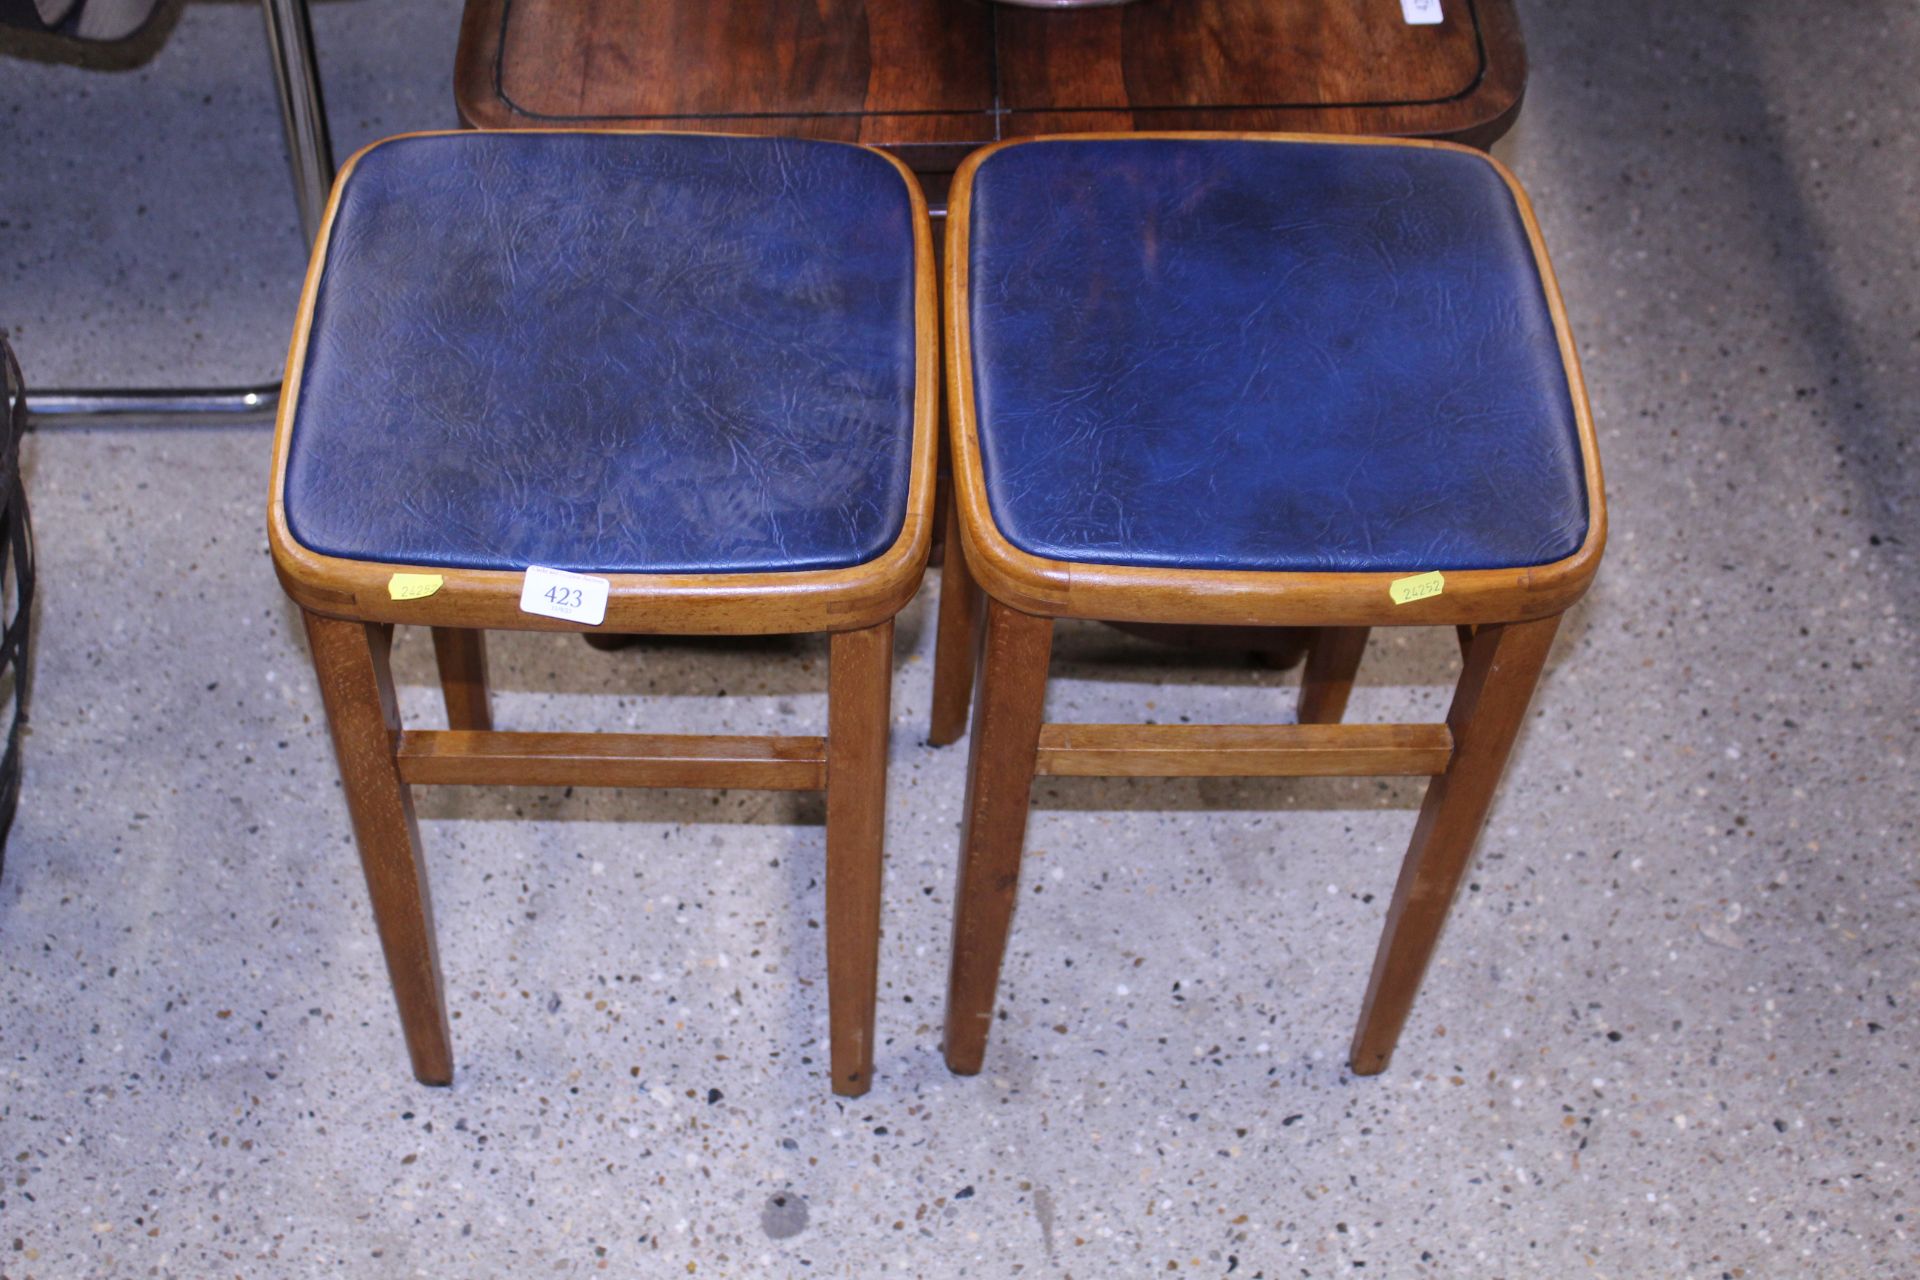 A pair of vintage beech kitchen stools